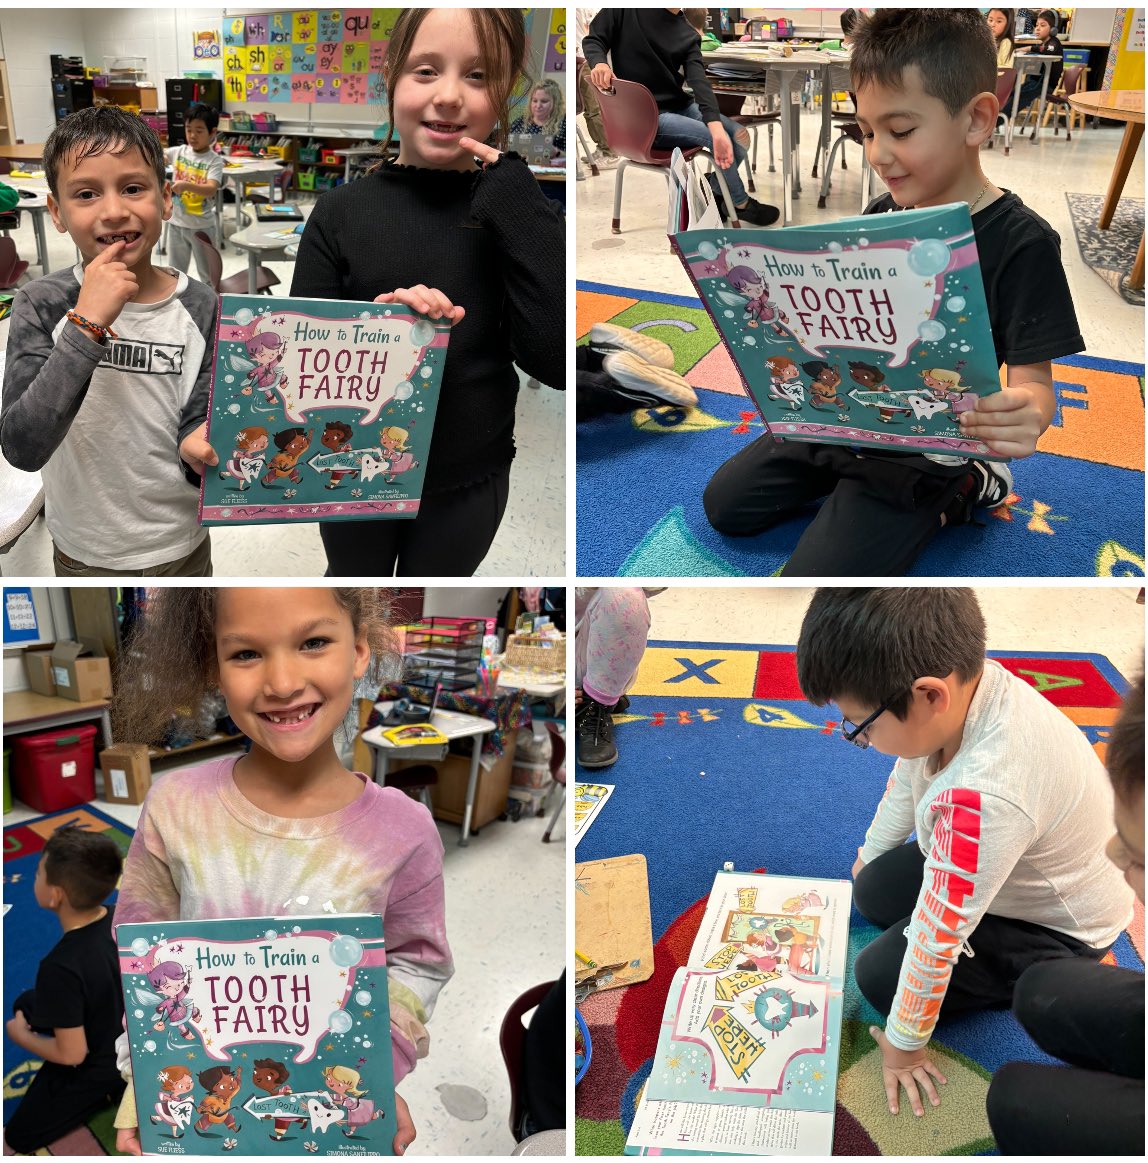 Missing teeth? 🦷 No problem! First graders at @roundraccoons know how to train a tooth fairy now. Thanks, @SueFliess #simonasanfilippo @skyponypress @mymcpsva #kidlit